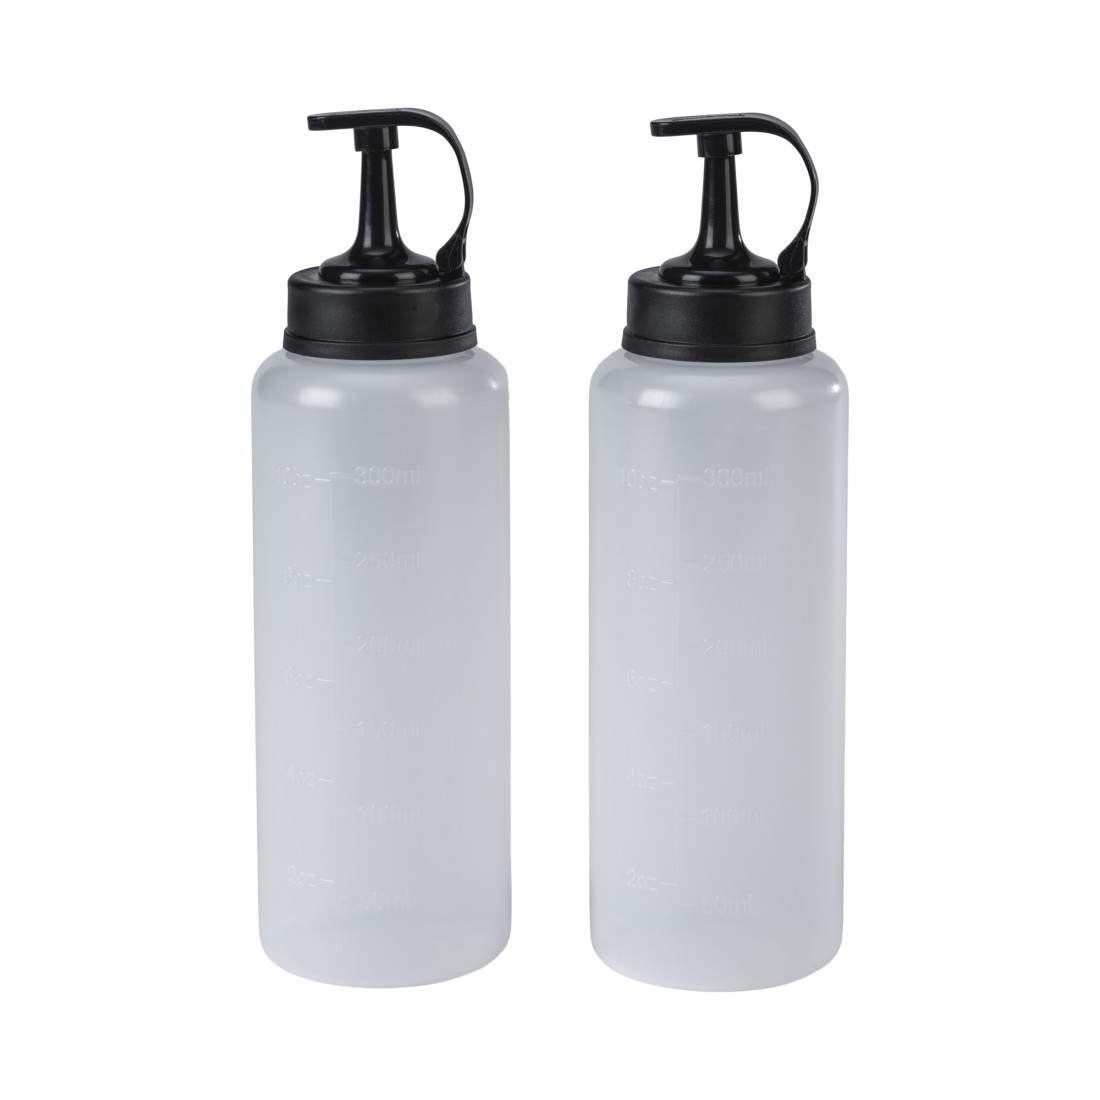  OXO Good Grips Chef's Squeeze Bottle Set, Plastic